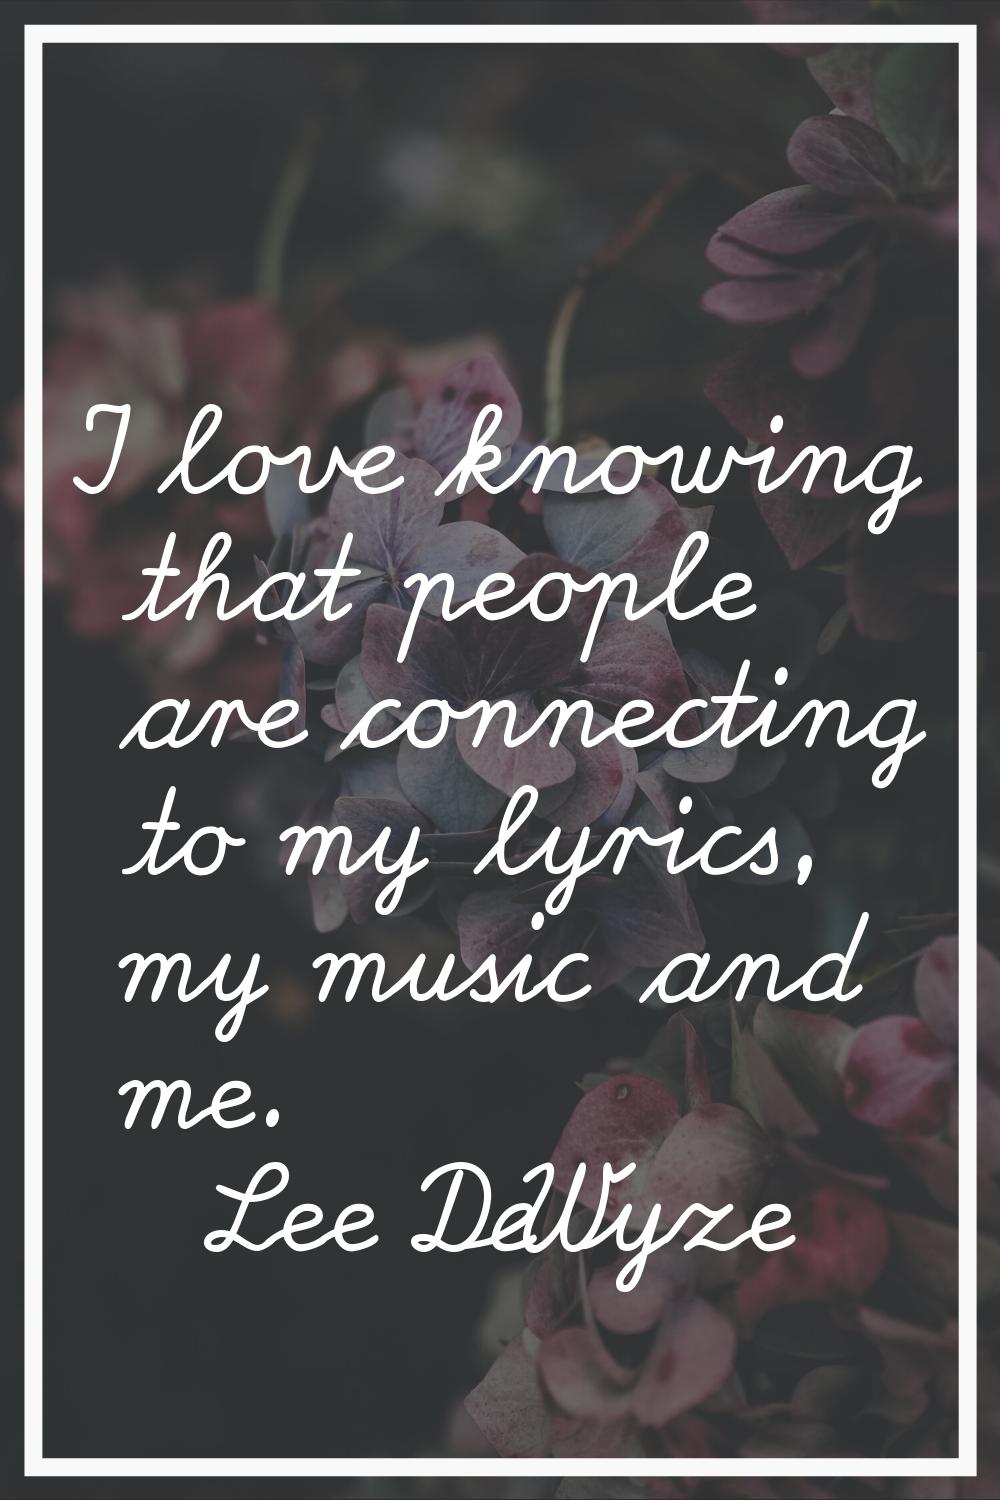 I love knowing that people are connecting to my lyrics, my music and me.